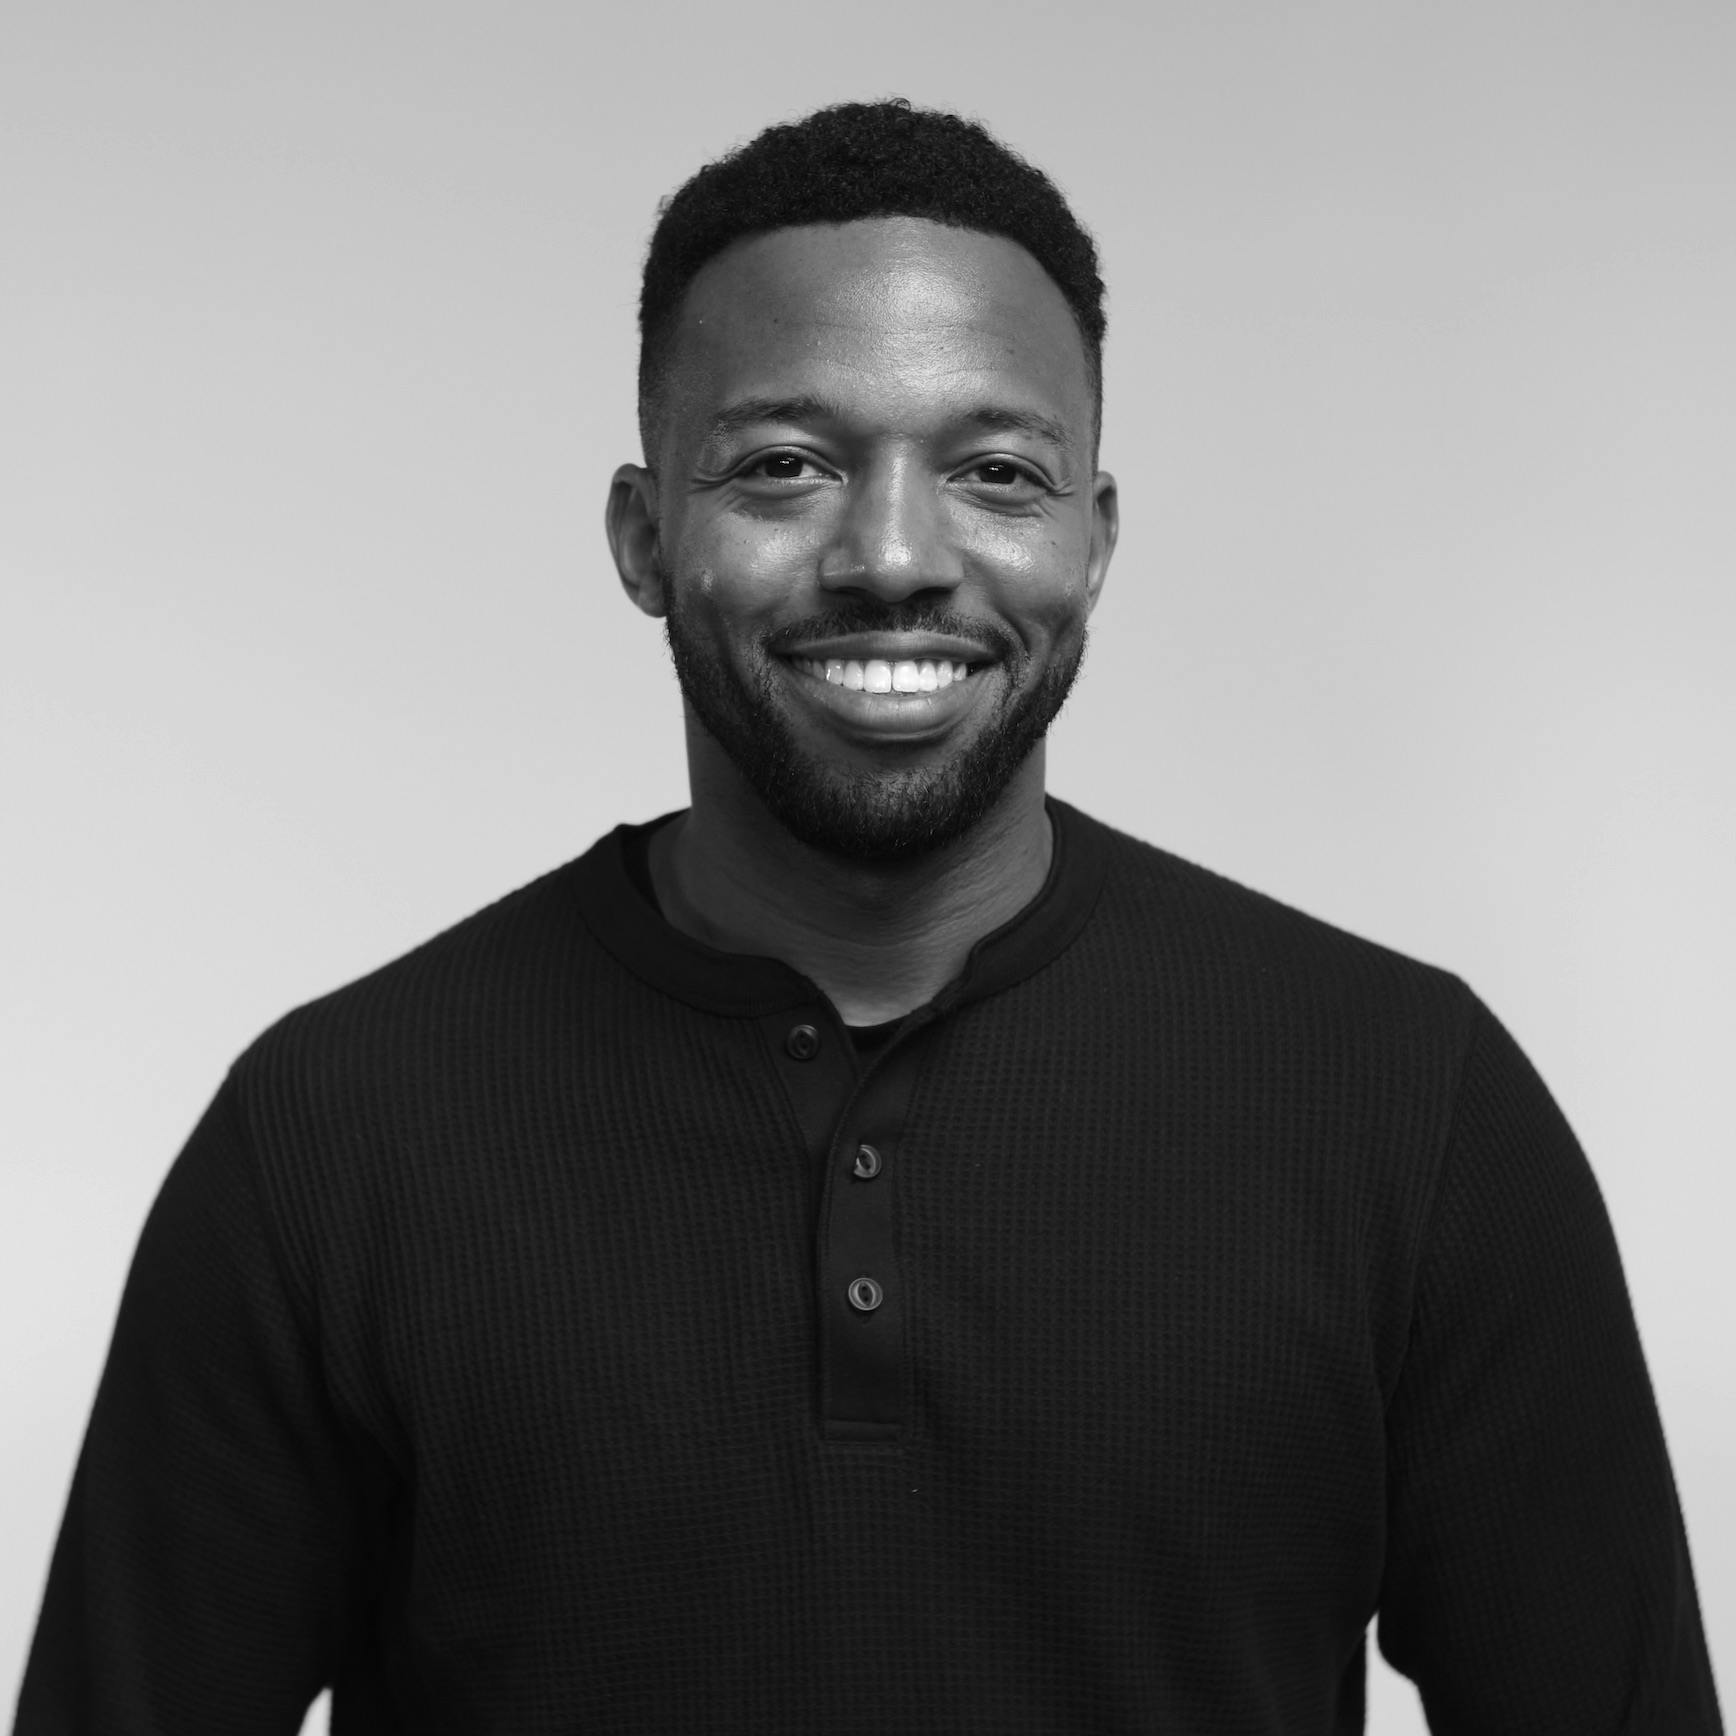 Marcus Sawyerr on Using AI to Drive Inclusion in Recruiting